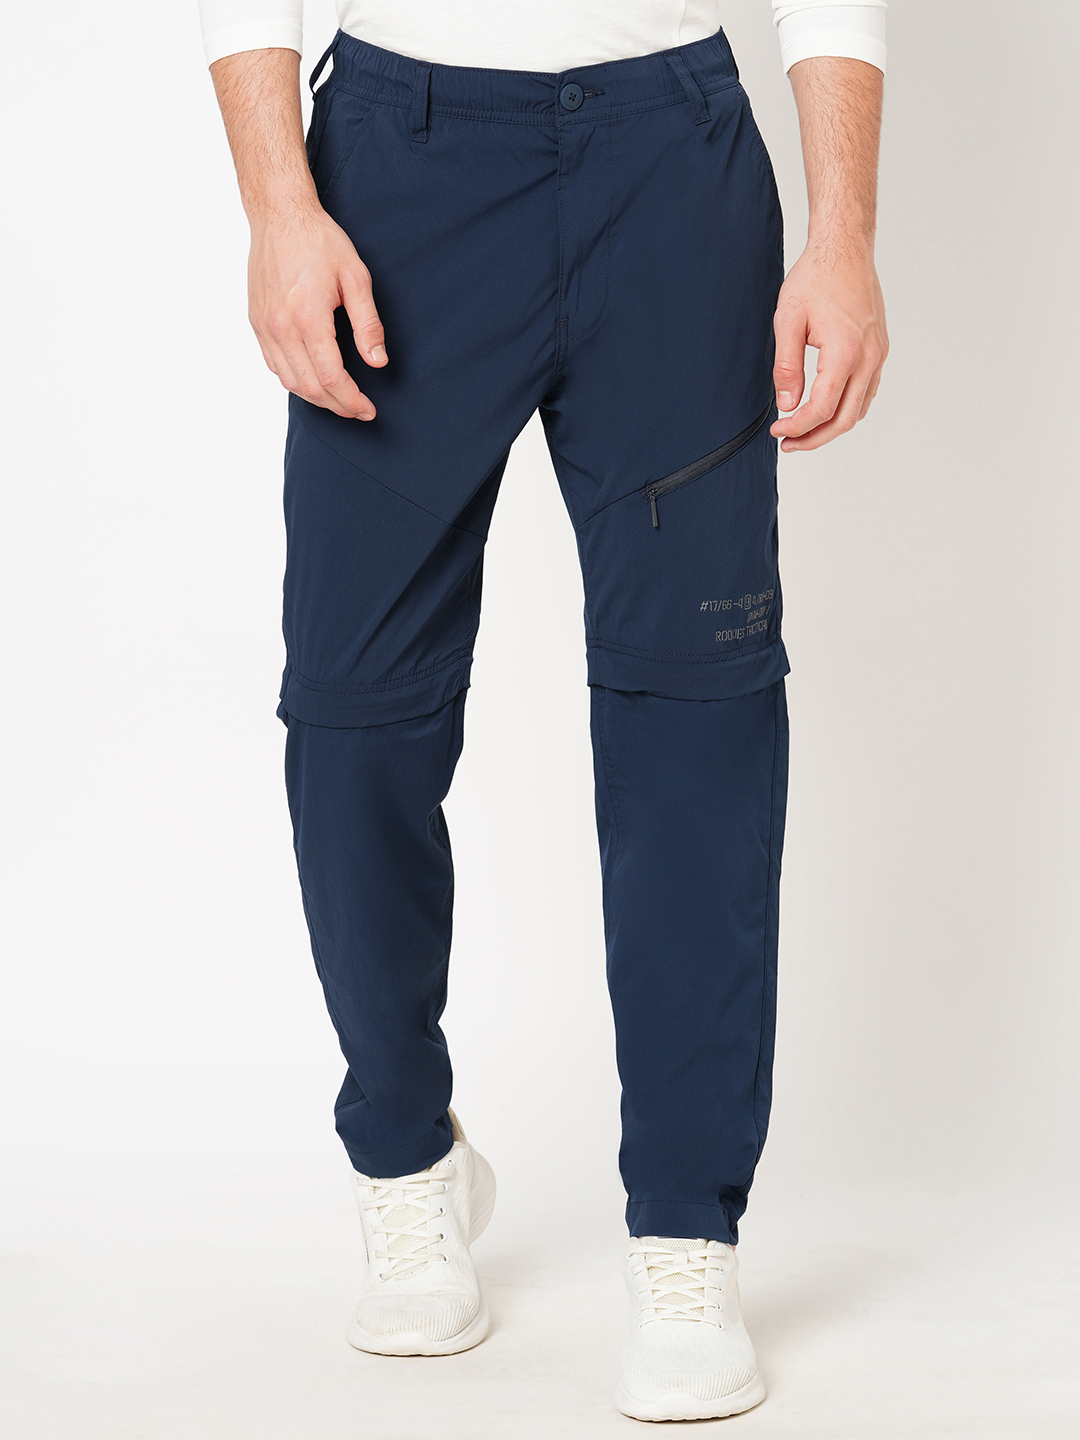 NAVY UTILITY PANT (SLIM TAPERED FIT)